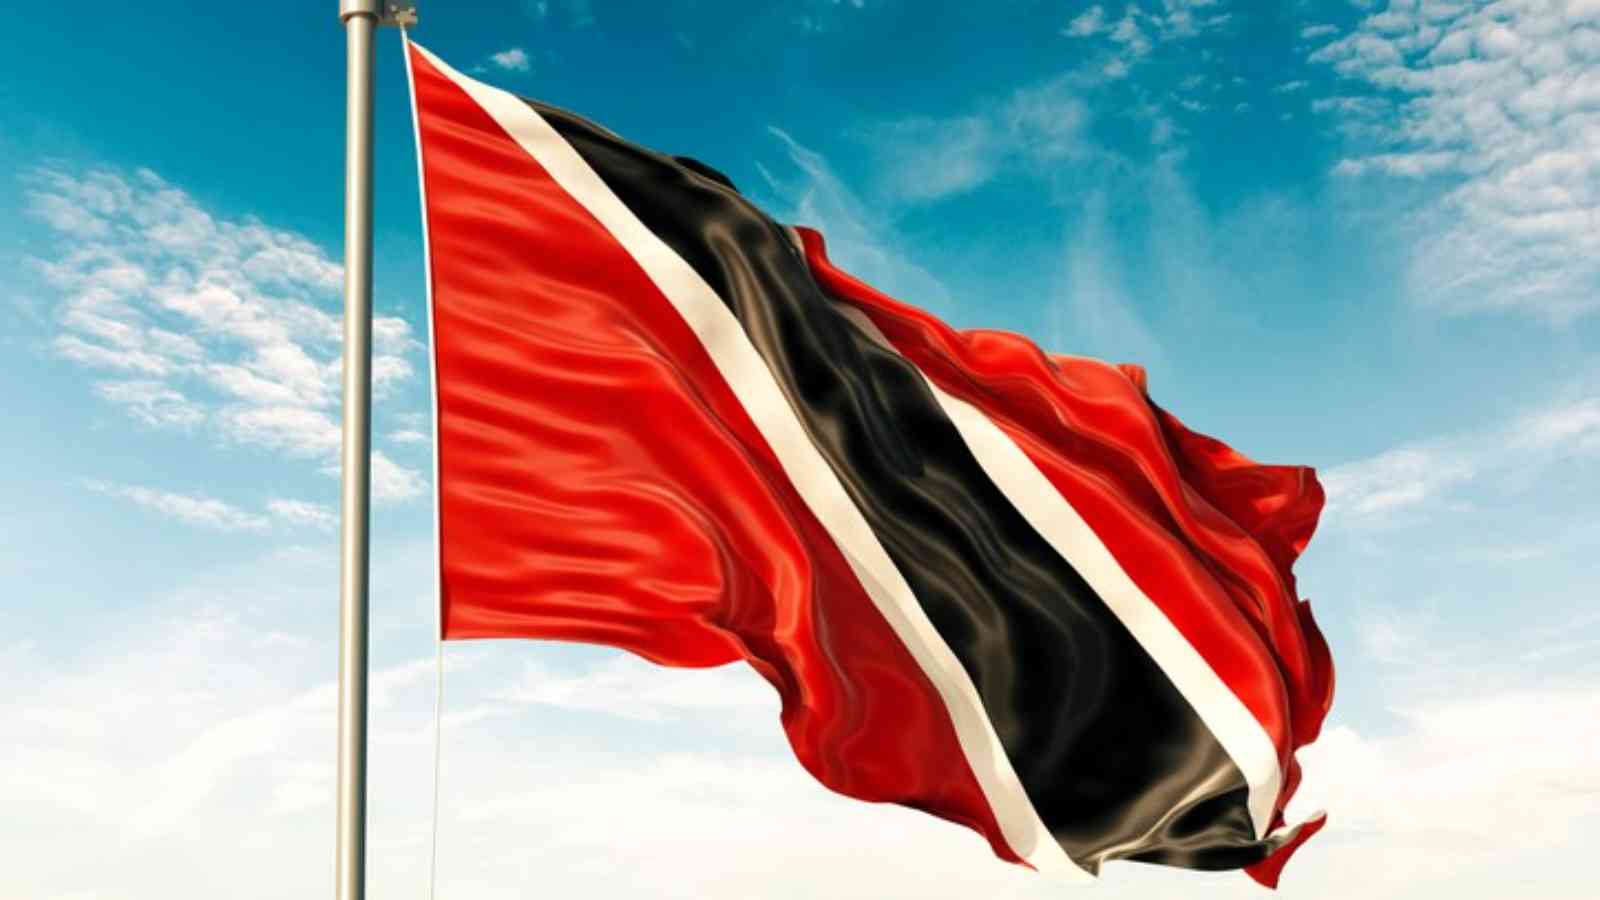 Trinidad and Tobago Independence Day 2022: Date, History and Significance